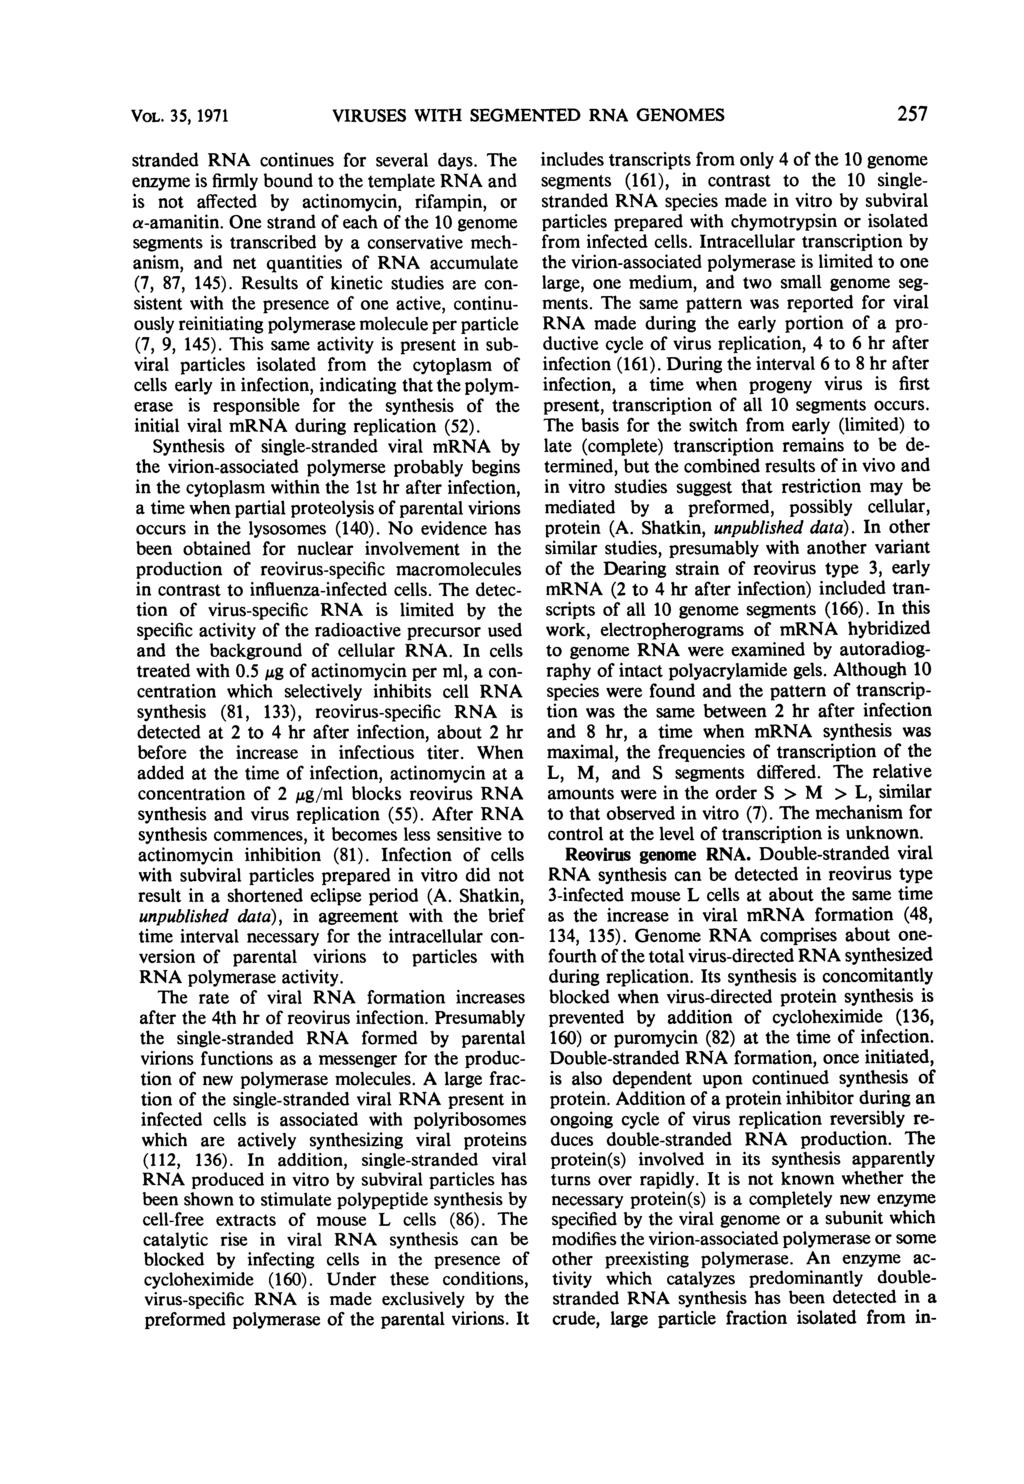 VOL. 35, 1971 VIRUSES WITH SEGMENTED RNA GENOMES257 stranded RNA continues for several days. The enzyme is firmly bound to the template RNA and is not affected by actinomycin, rifampin, or a-amanitin.